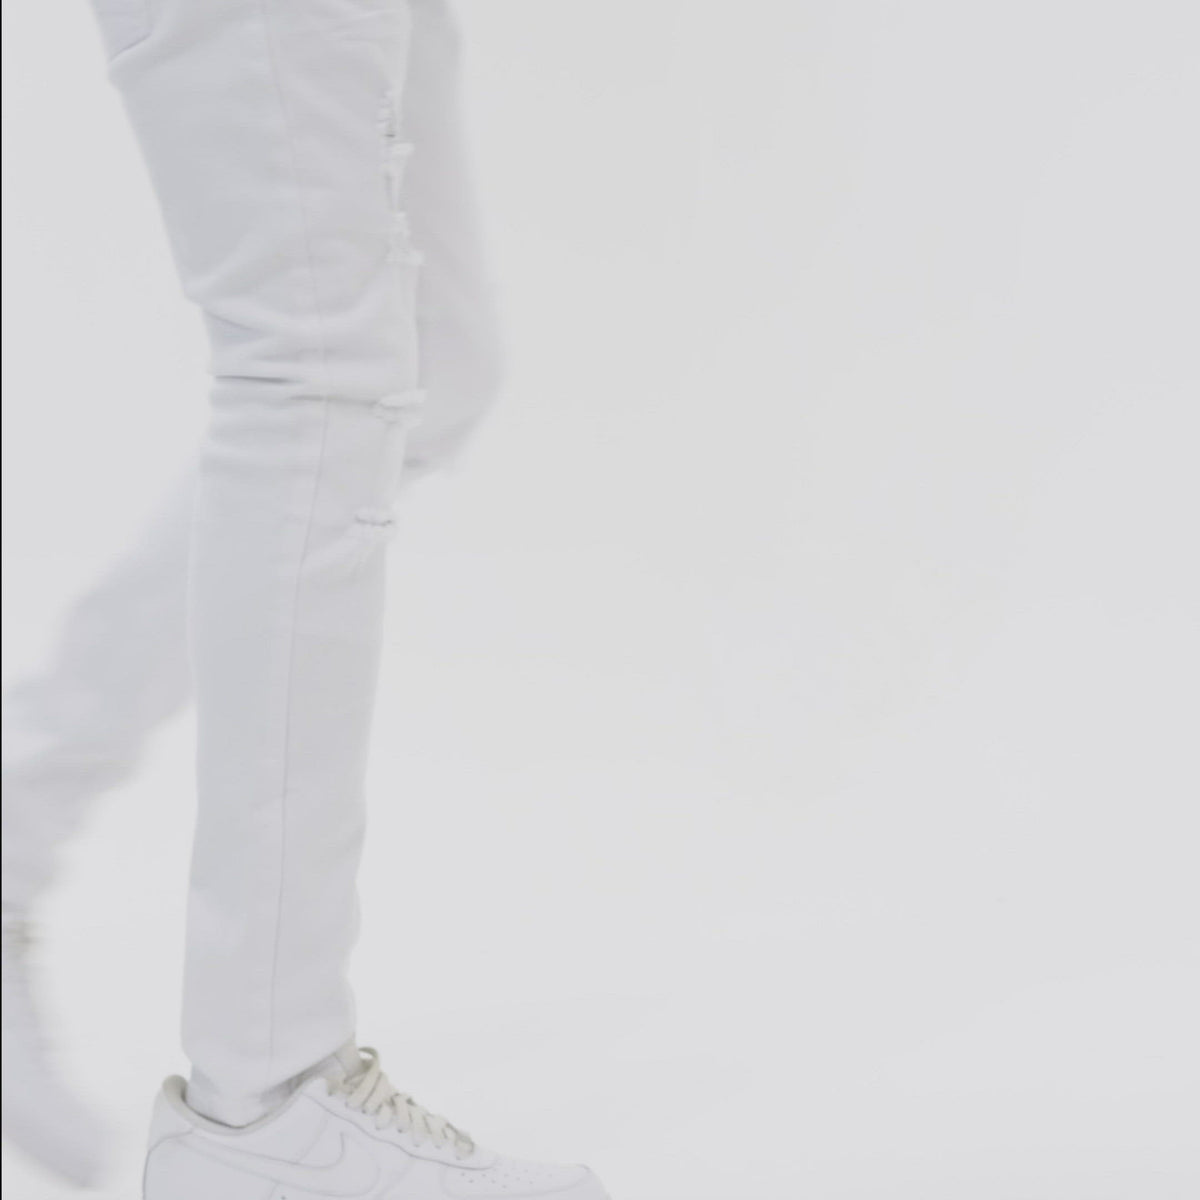 WHITE PANTS WITH RIPS